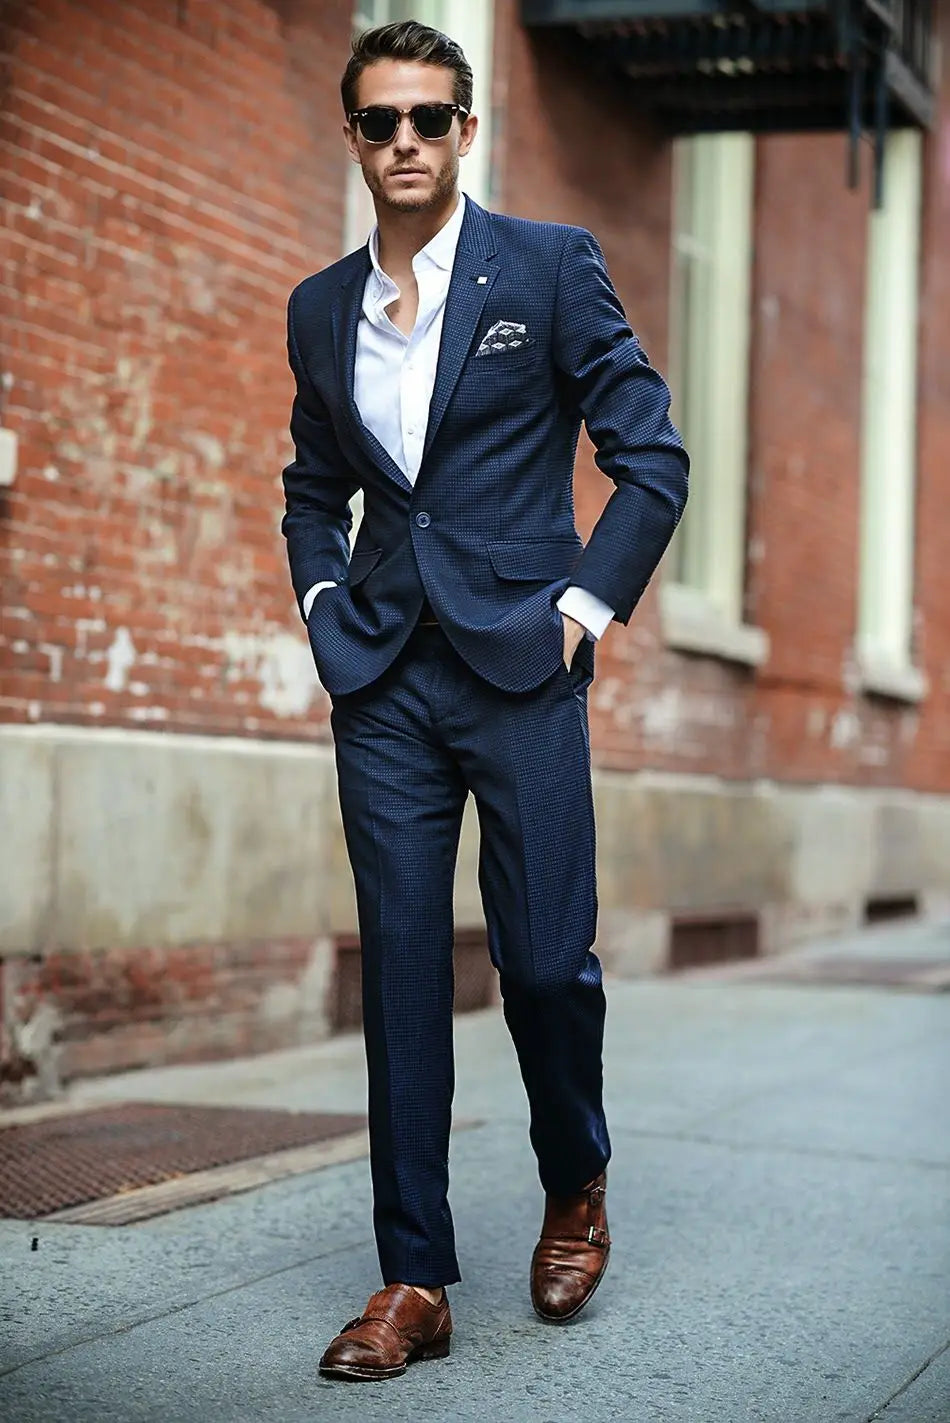 How to Wear a Blue Suit for Different Occasions? – MENSWEARR